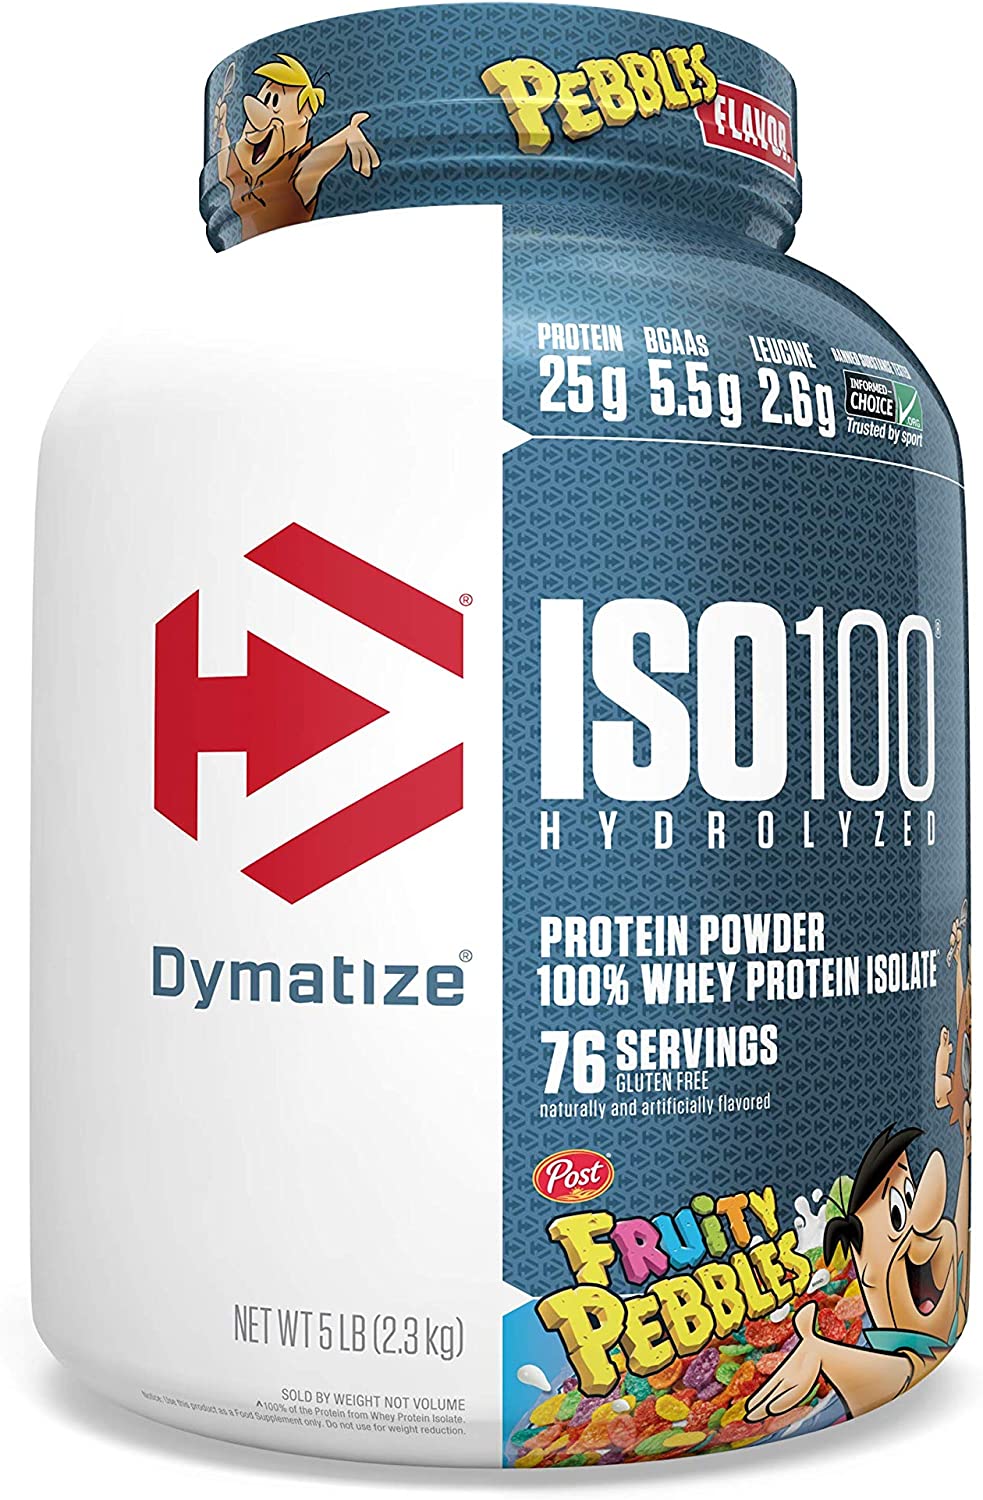 5-lbs Dymatize ISO100 Hydrolyzed 100% Whey Isolate Protein Powder (Fruity Pebbles) $60.80 w/ S&S + Free Shipping